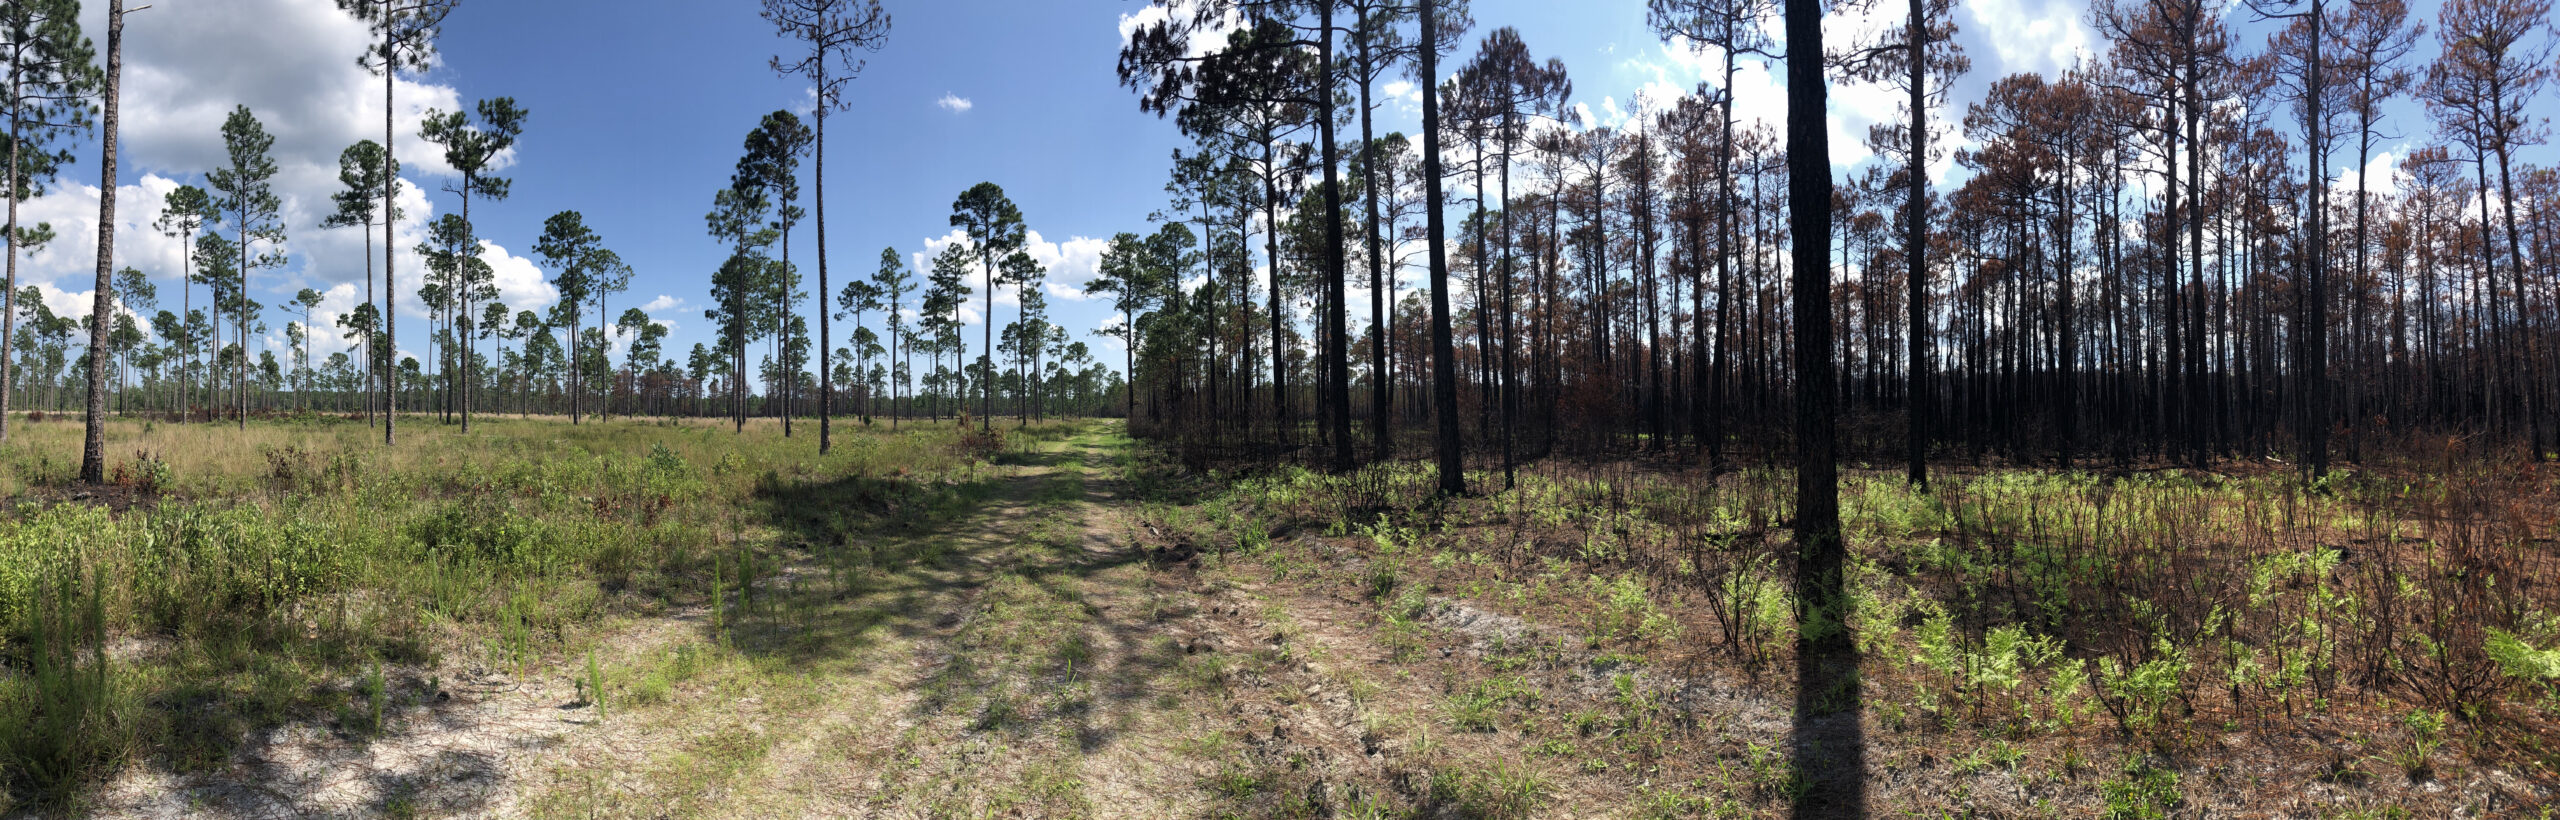 A longleaf pine forest where the right is recently burned and the left is green.